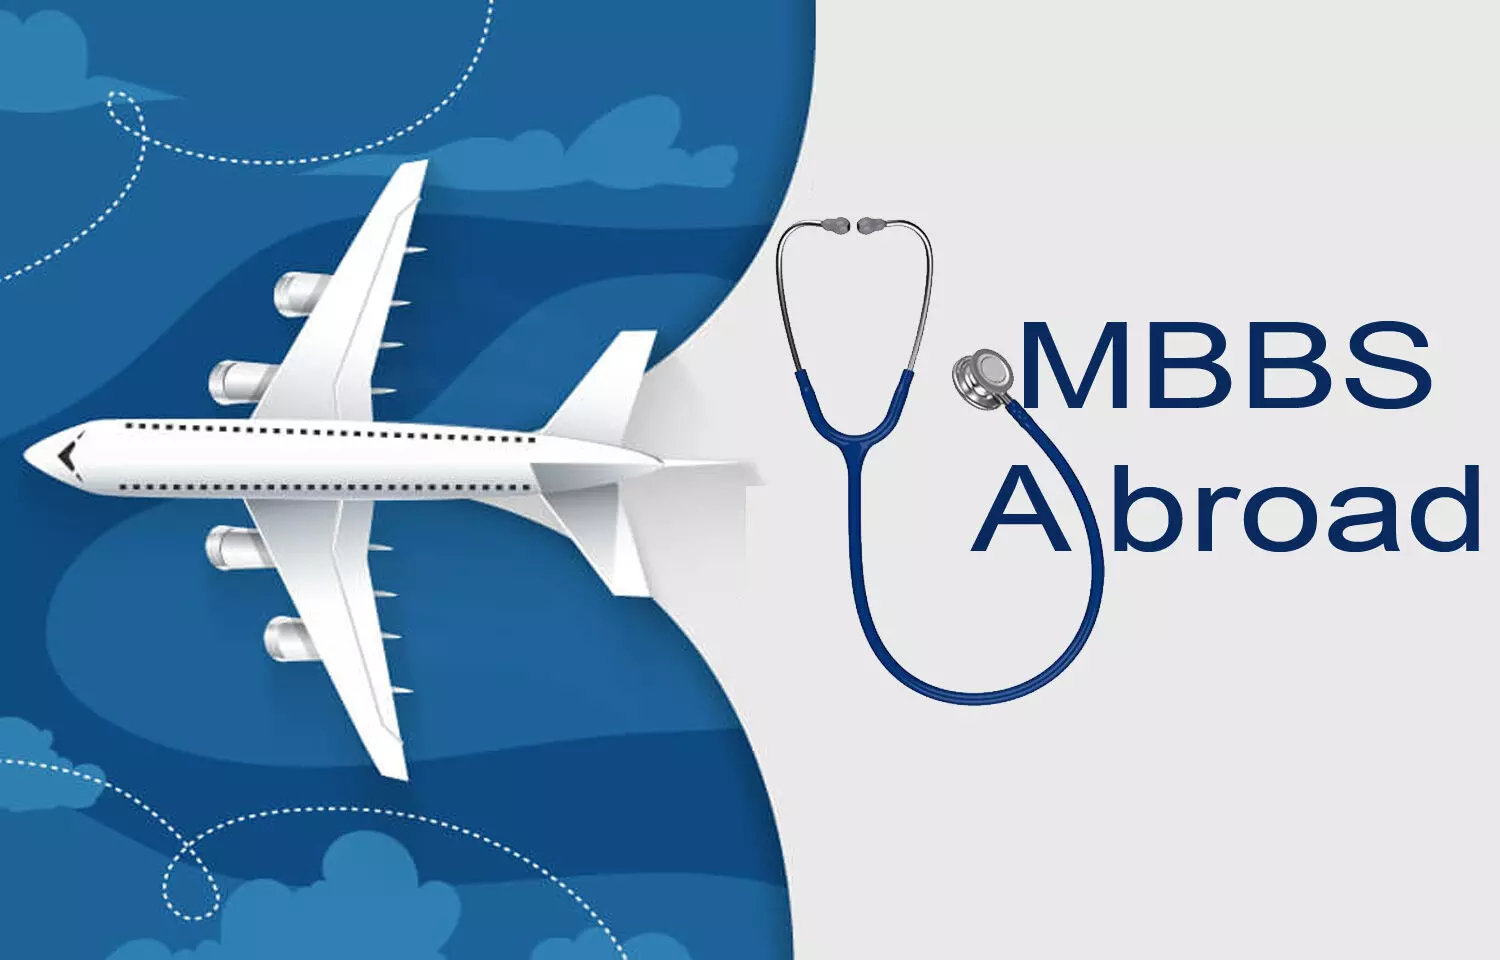 New FMG Regulations 2021 to change dynamics of MBBS abroad, here is how